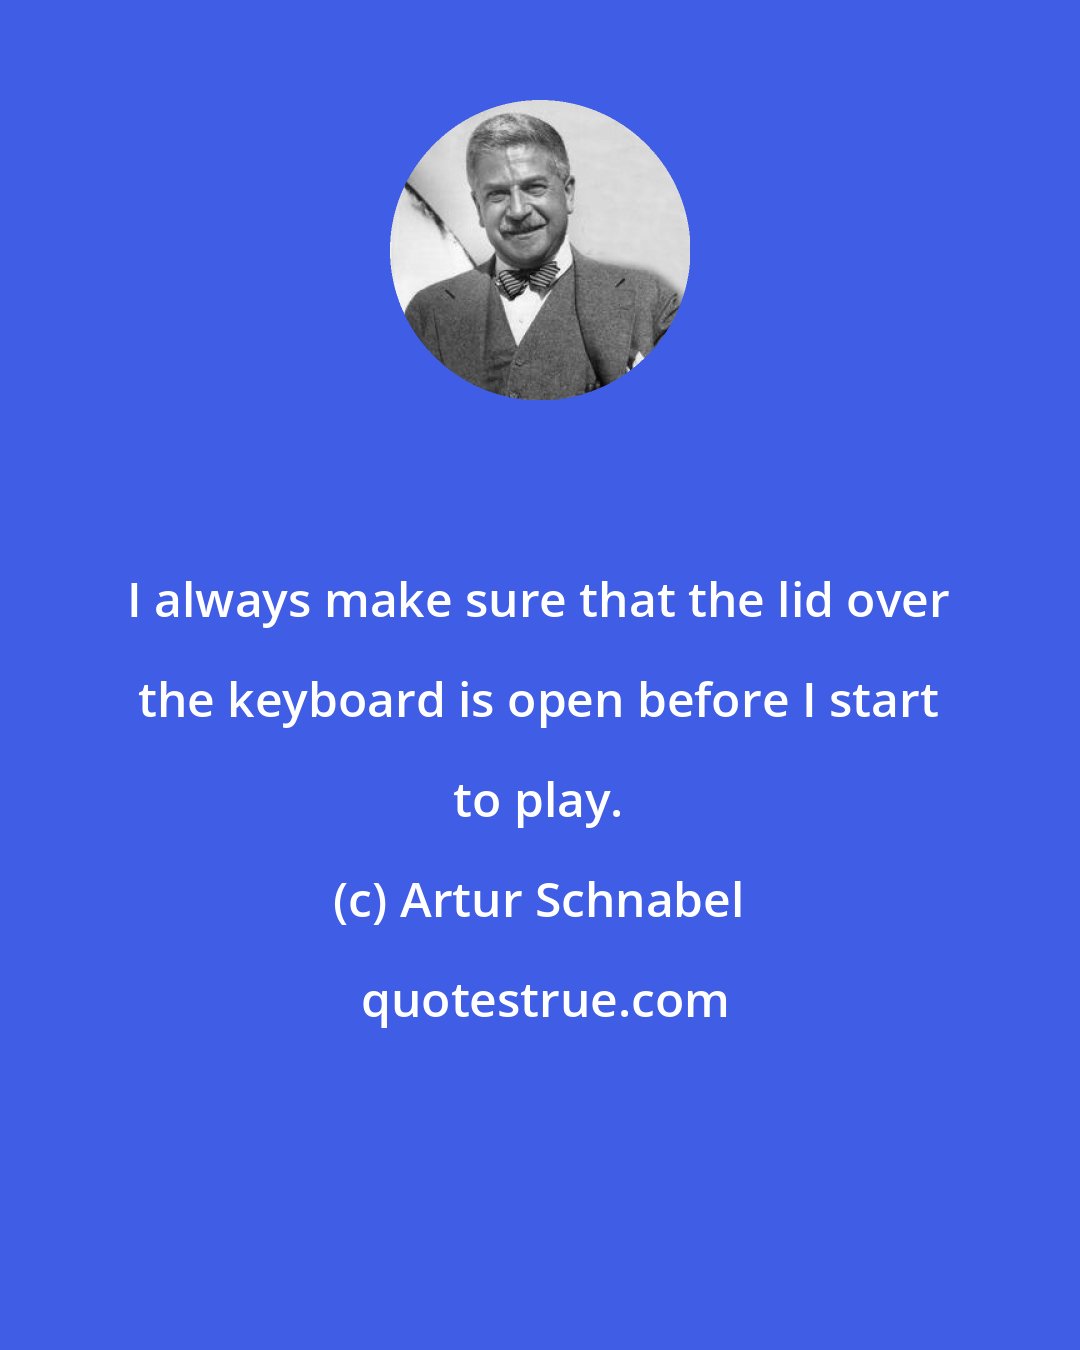 Artur Schnabel: I always make sure that the lid over the keyboard is open before I start to play.